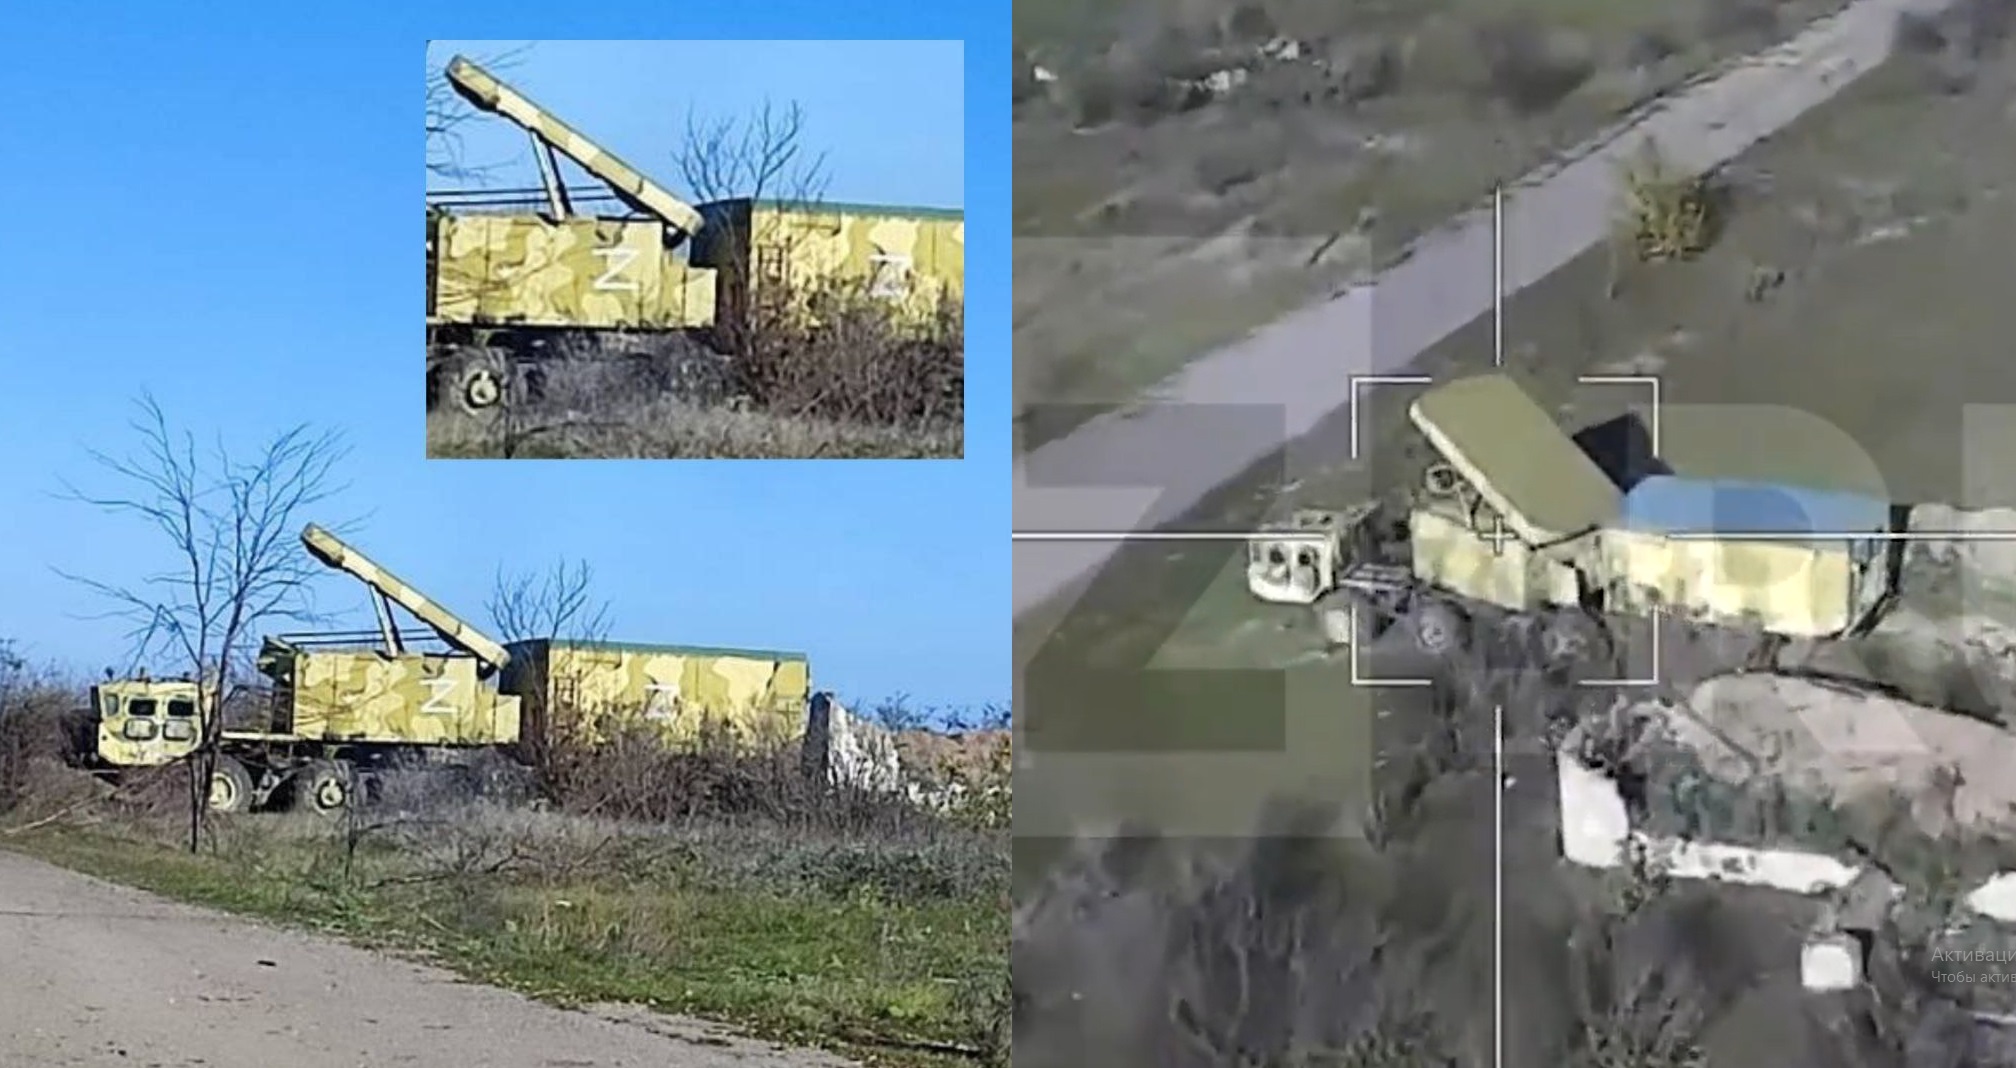 Russia destroys its own air defense system with kamikaze drone